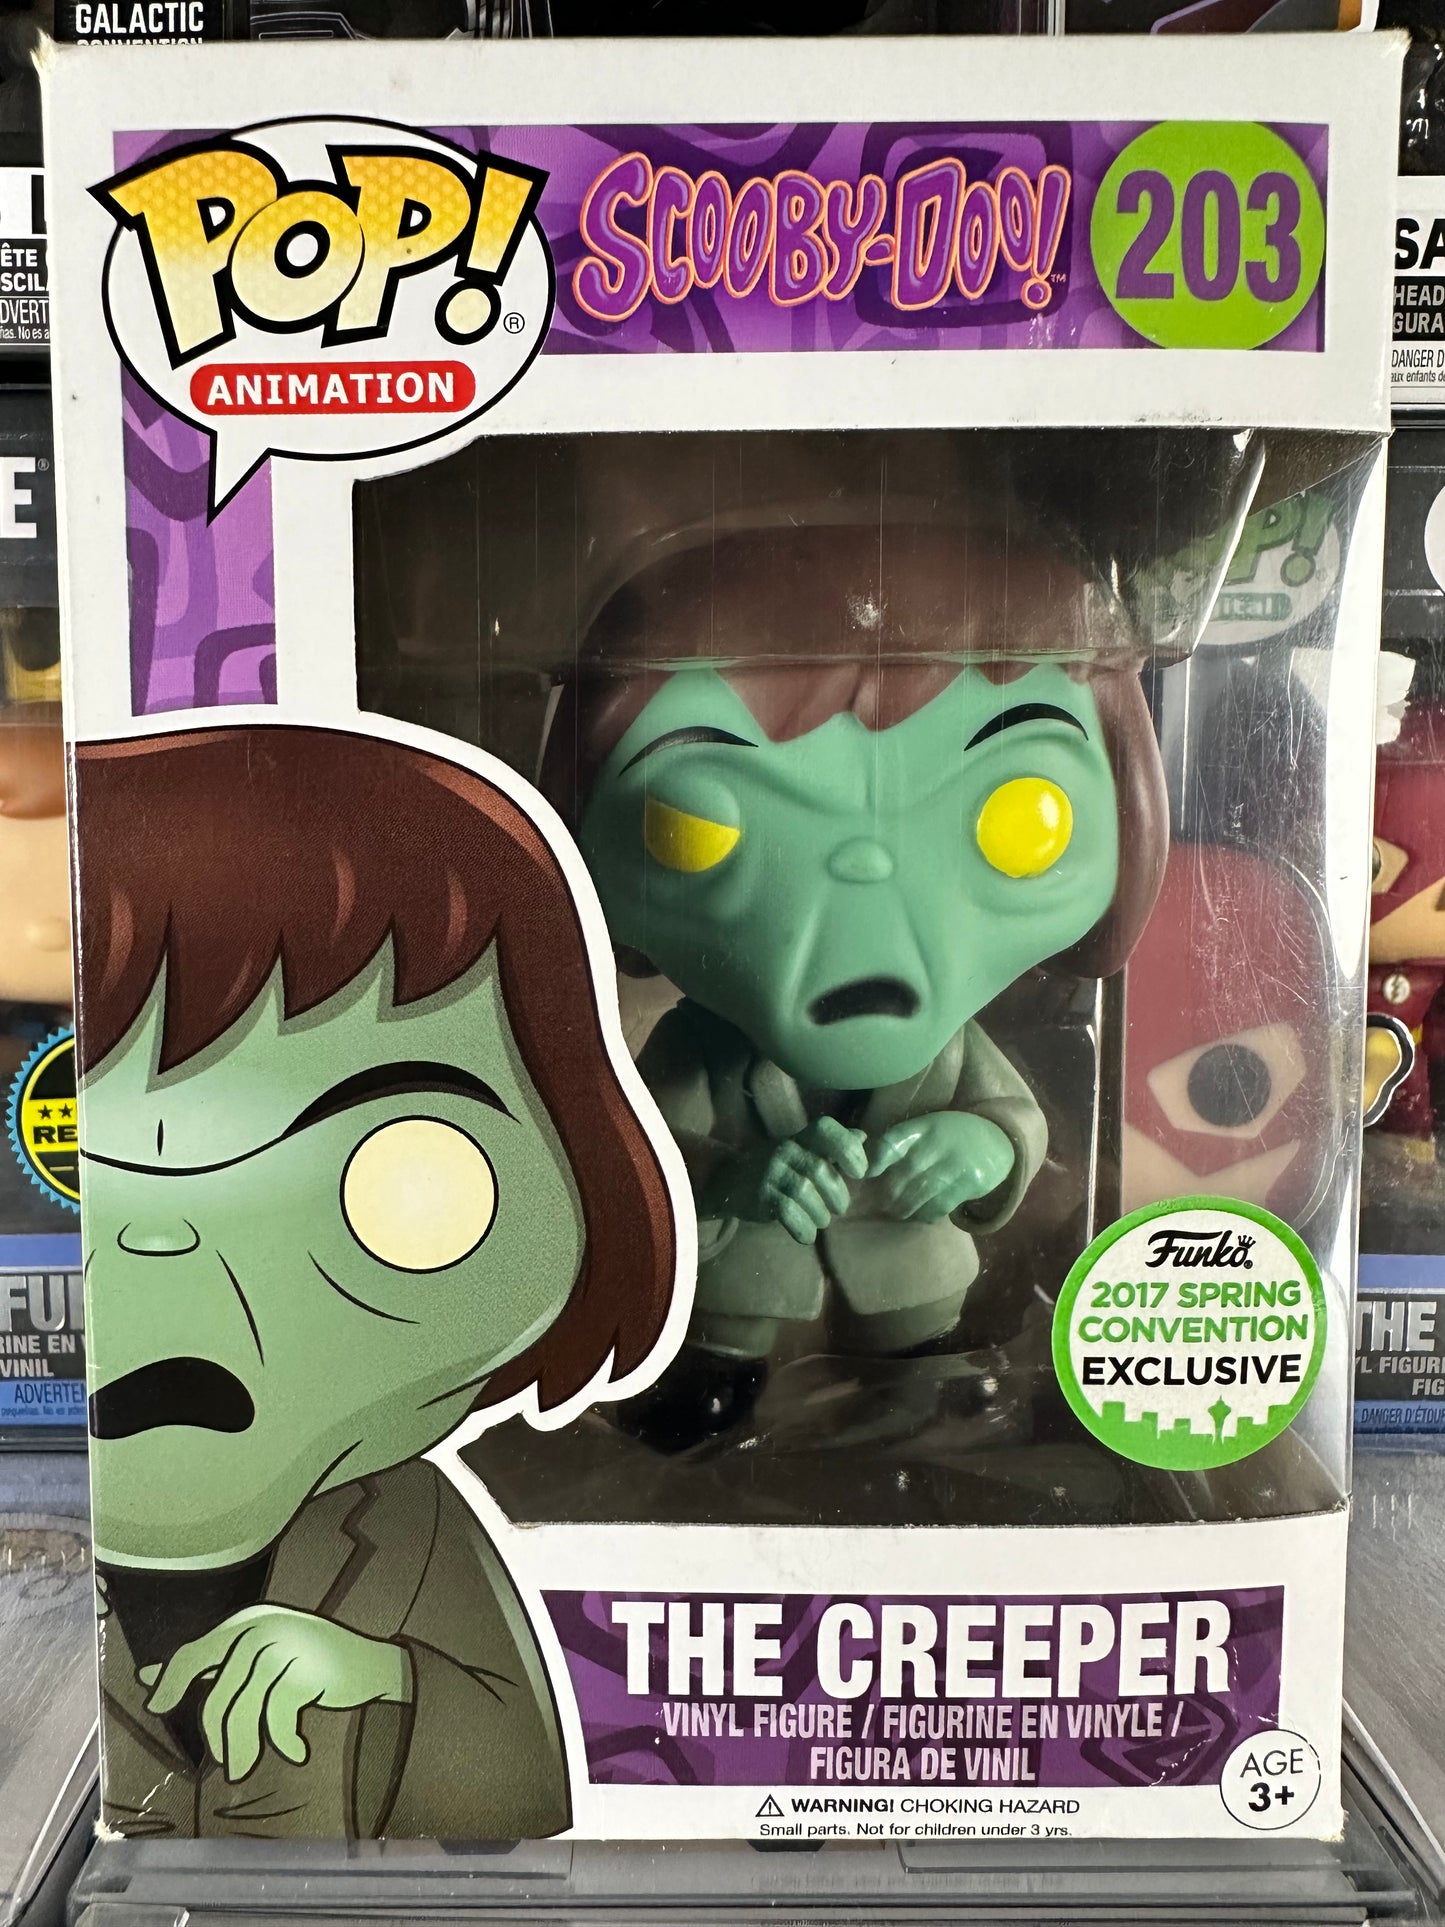 Scooby Doo - The Creeper (203) 2017 Spring Convention Exclusive Vaulted